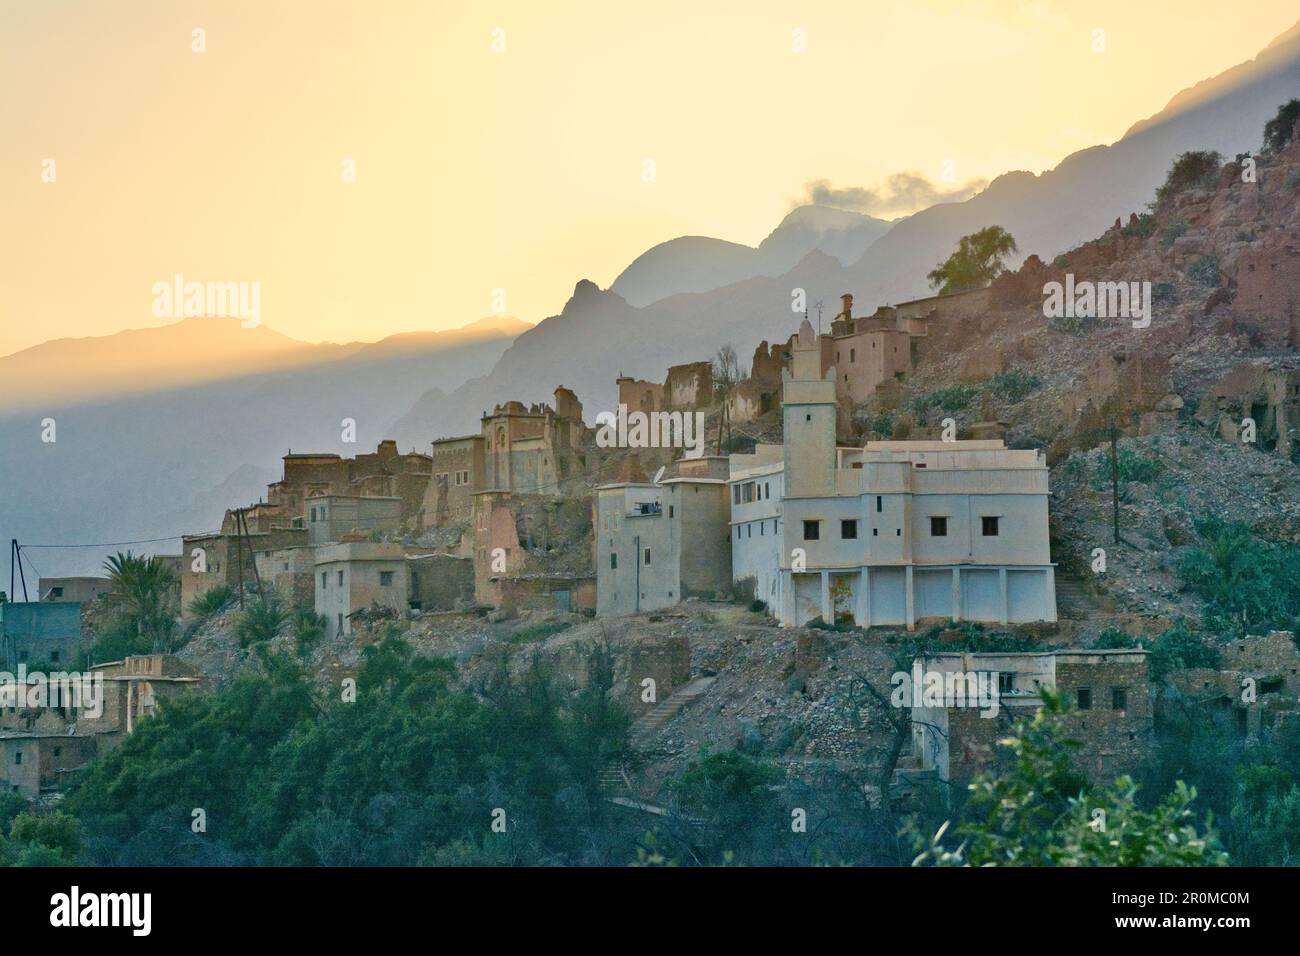 The village Oumesnat shortly after sunset at the foot of steep mountains, Valley of Ammeln in Anti Atlas, Morocco Stock Photo